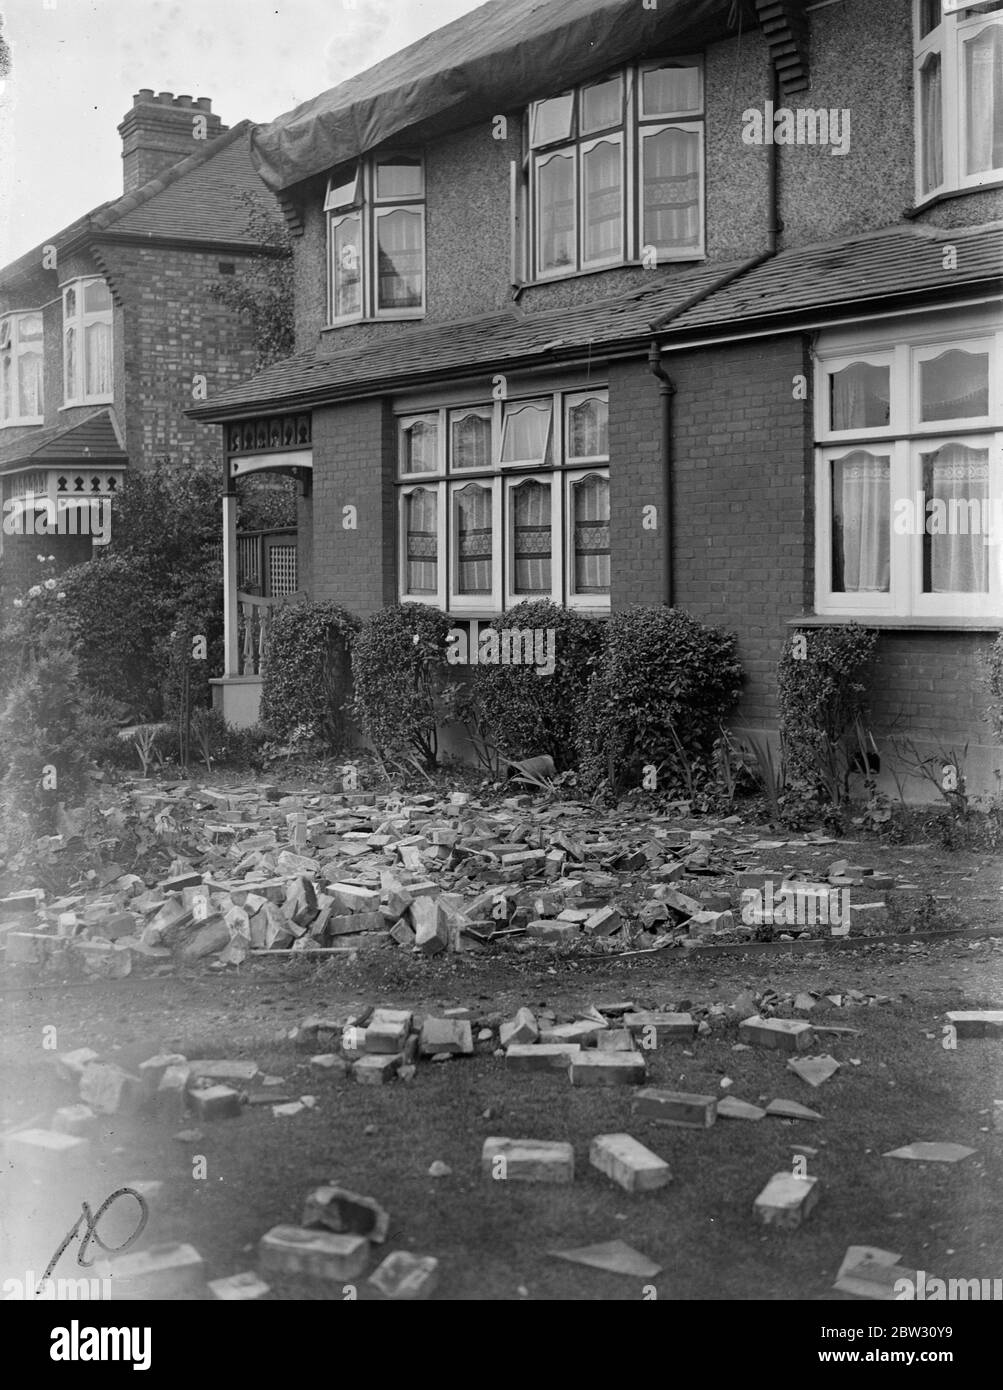 Houses damaged in great storm at Enfield . Two semi detached houses were struck and badly damaged by a thunderbolt during the great storm which broke over London . The greater part of the roof was torn away and pieces of furniture were scattered about and thrown on to the floor . Fireplaces were blown and water pipes burst . Mr Franck Higham with his wife and child were at tea when the thunderbolt came down the chimney , and had a narrow escape . Mr Frank Higham clearing away the debris from his garden after the havoc wrought by the storm . 23 July 1932 Stock Photo